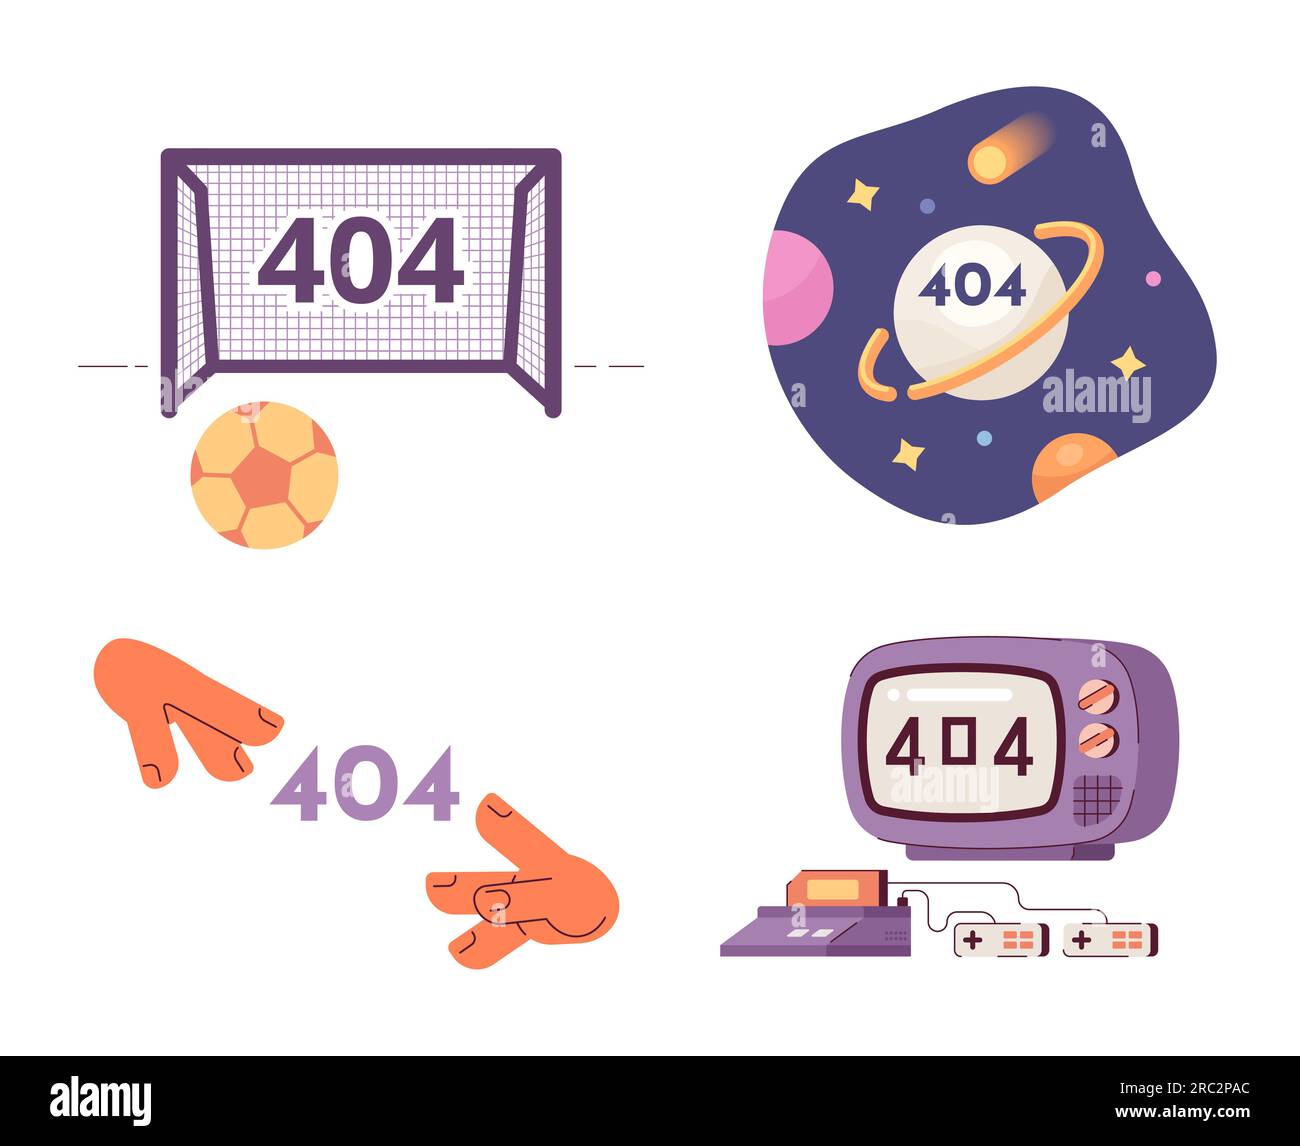 Activity and hobbies error 404 flash messages pack Stock Vector